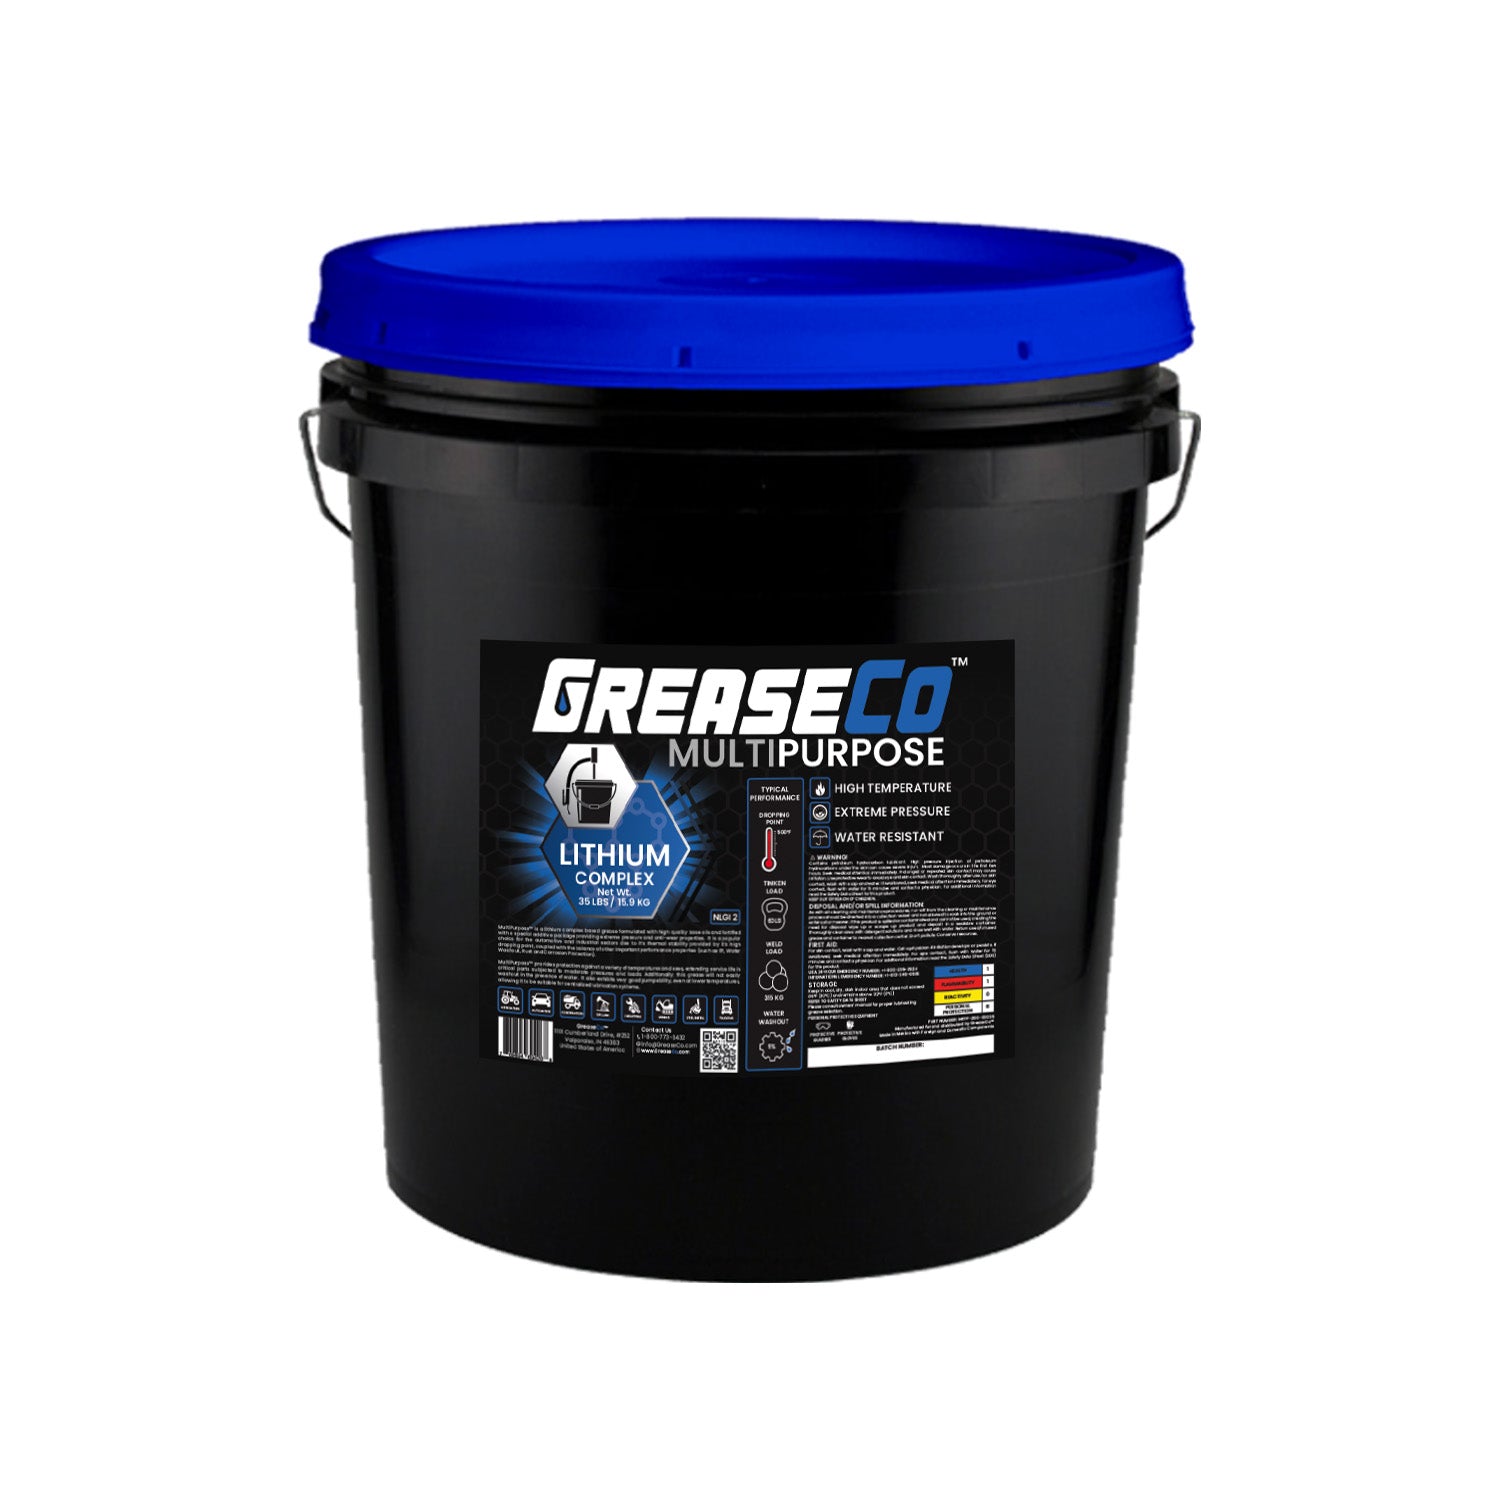 Lithium Complex Temp High Performance Grease 35 LB Bucket Pail of GreaseCo MultiPurpose